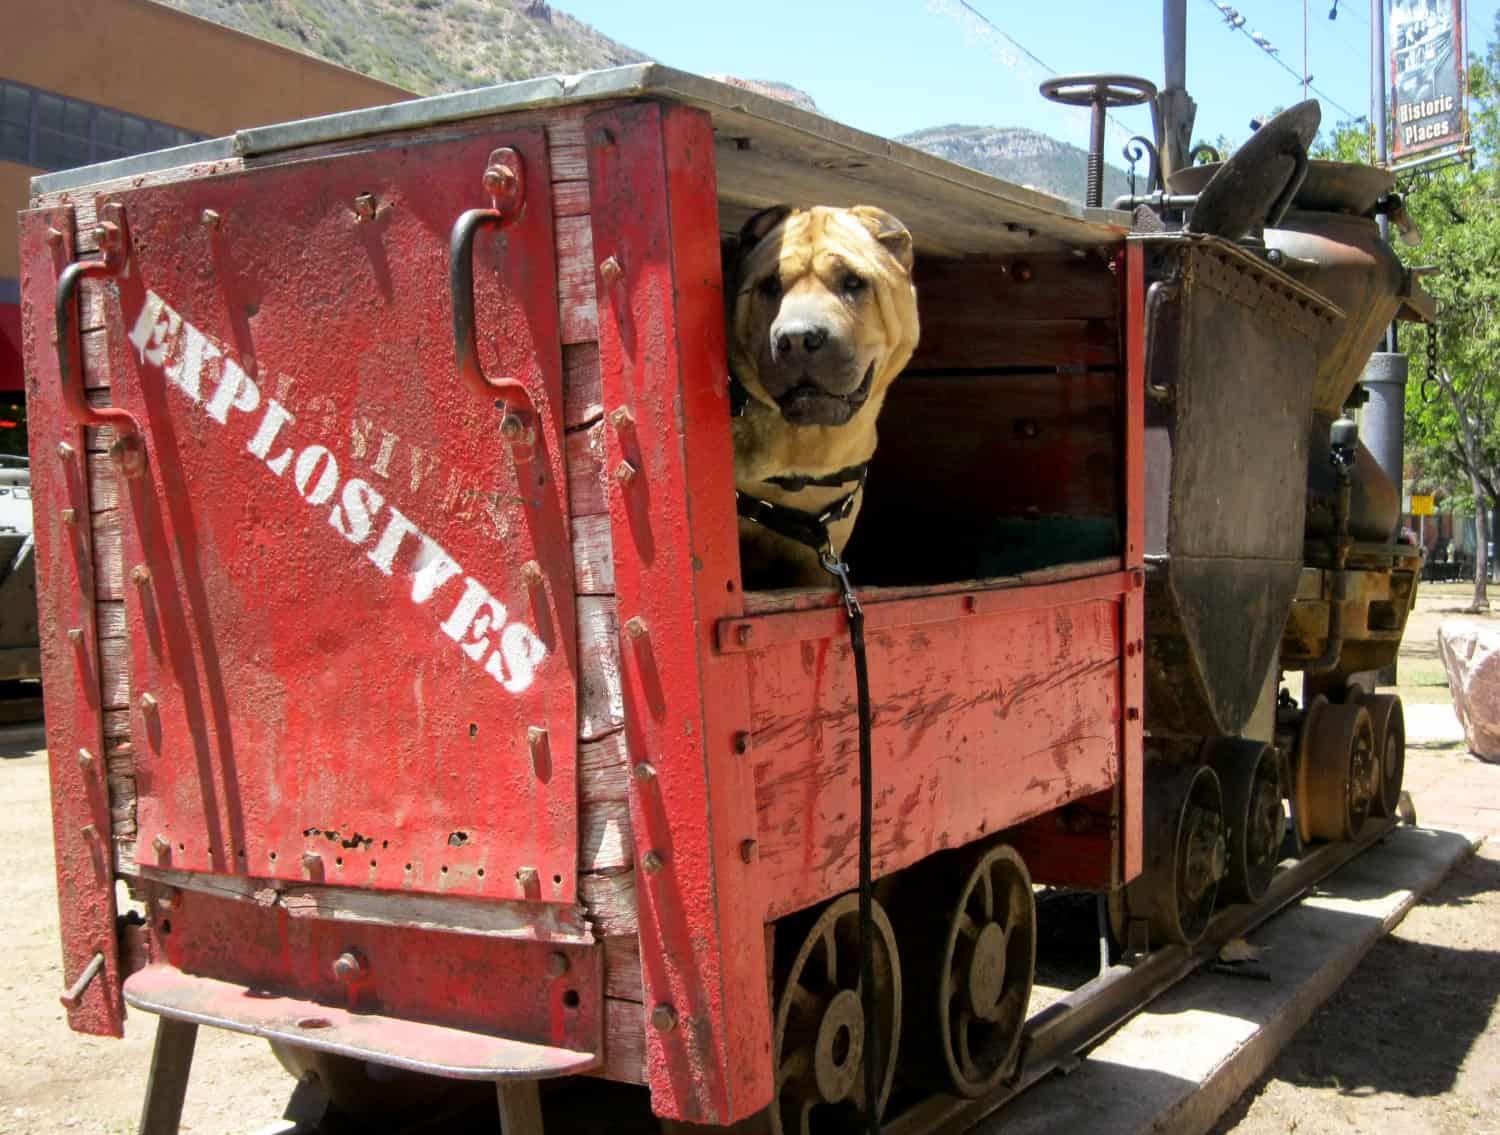 Shar-pei dog in an old train cart marked for explosives in Bisbee, AZ